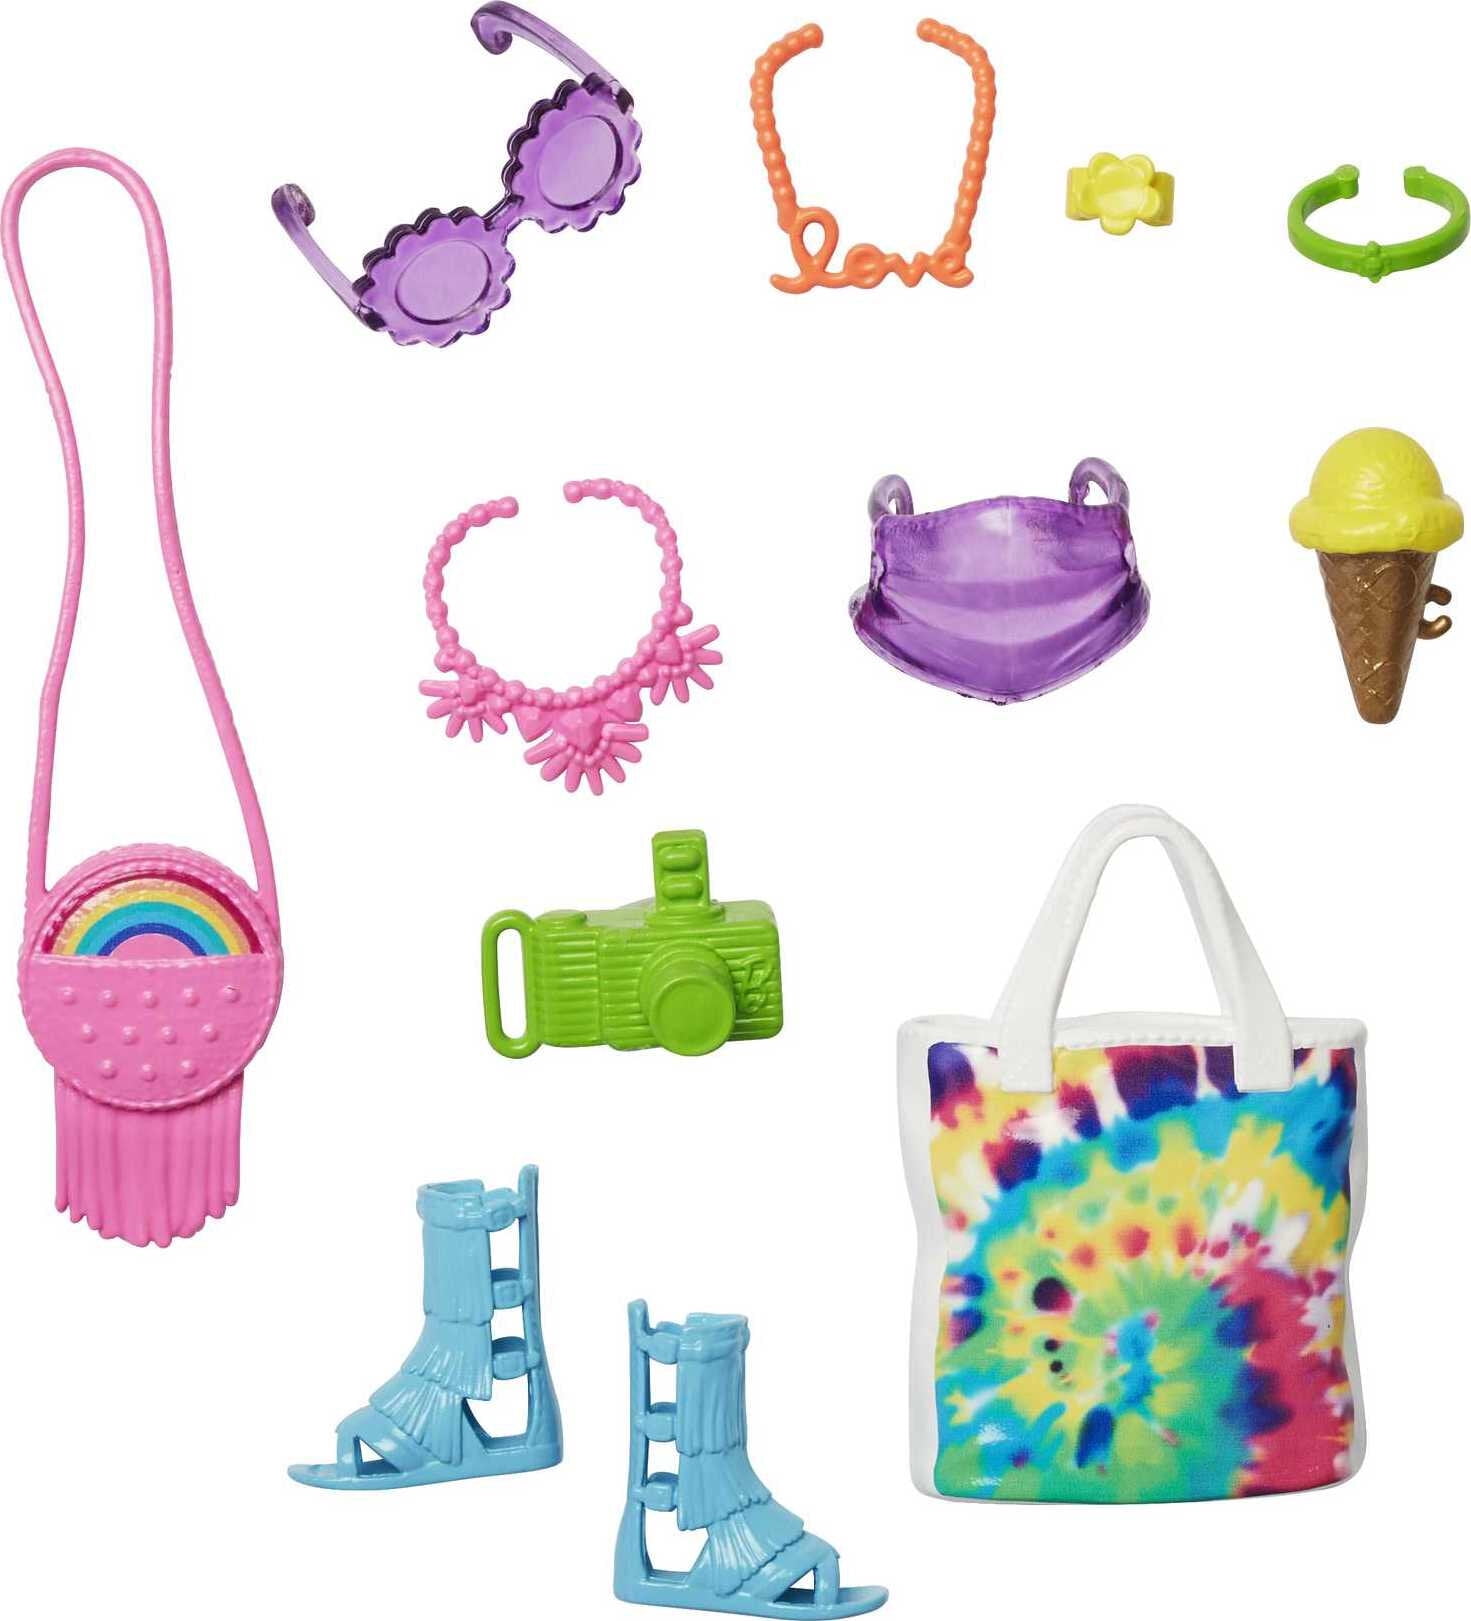 Barbie Accessories Neon Festival Pack with 11 Storytelling Pieces for Barbie Dolls